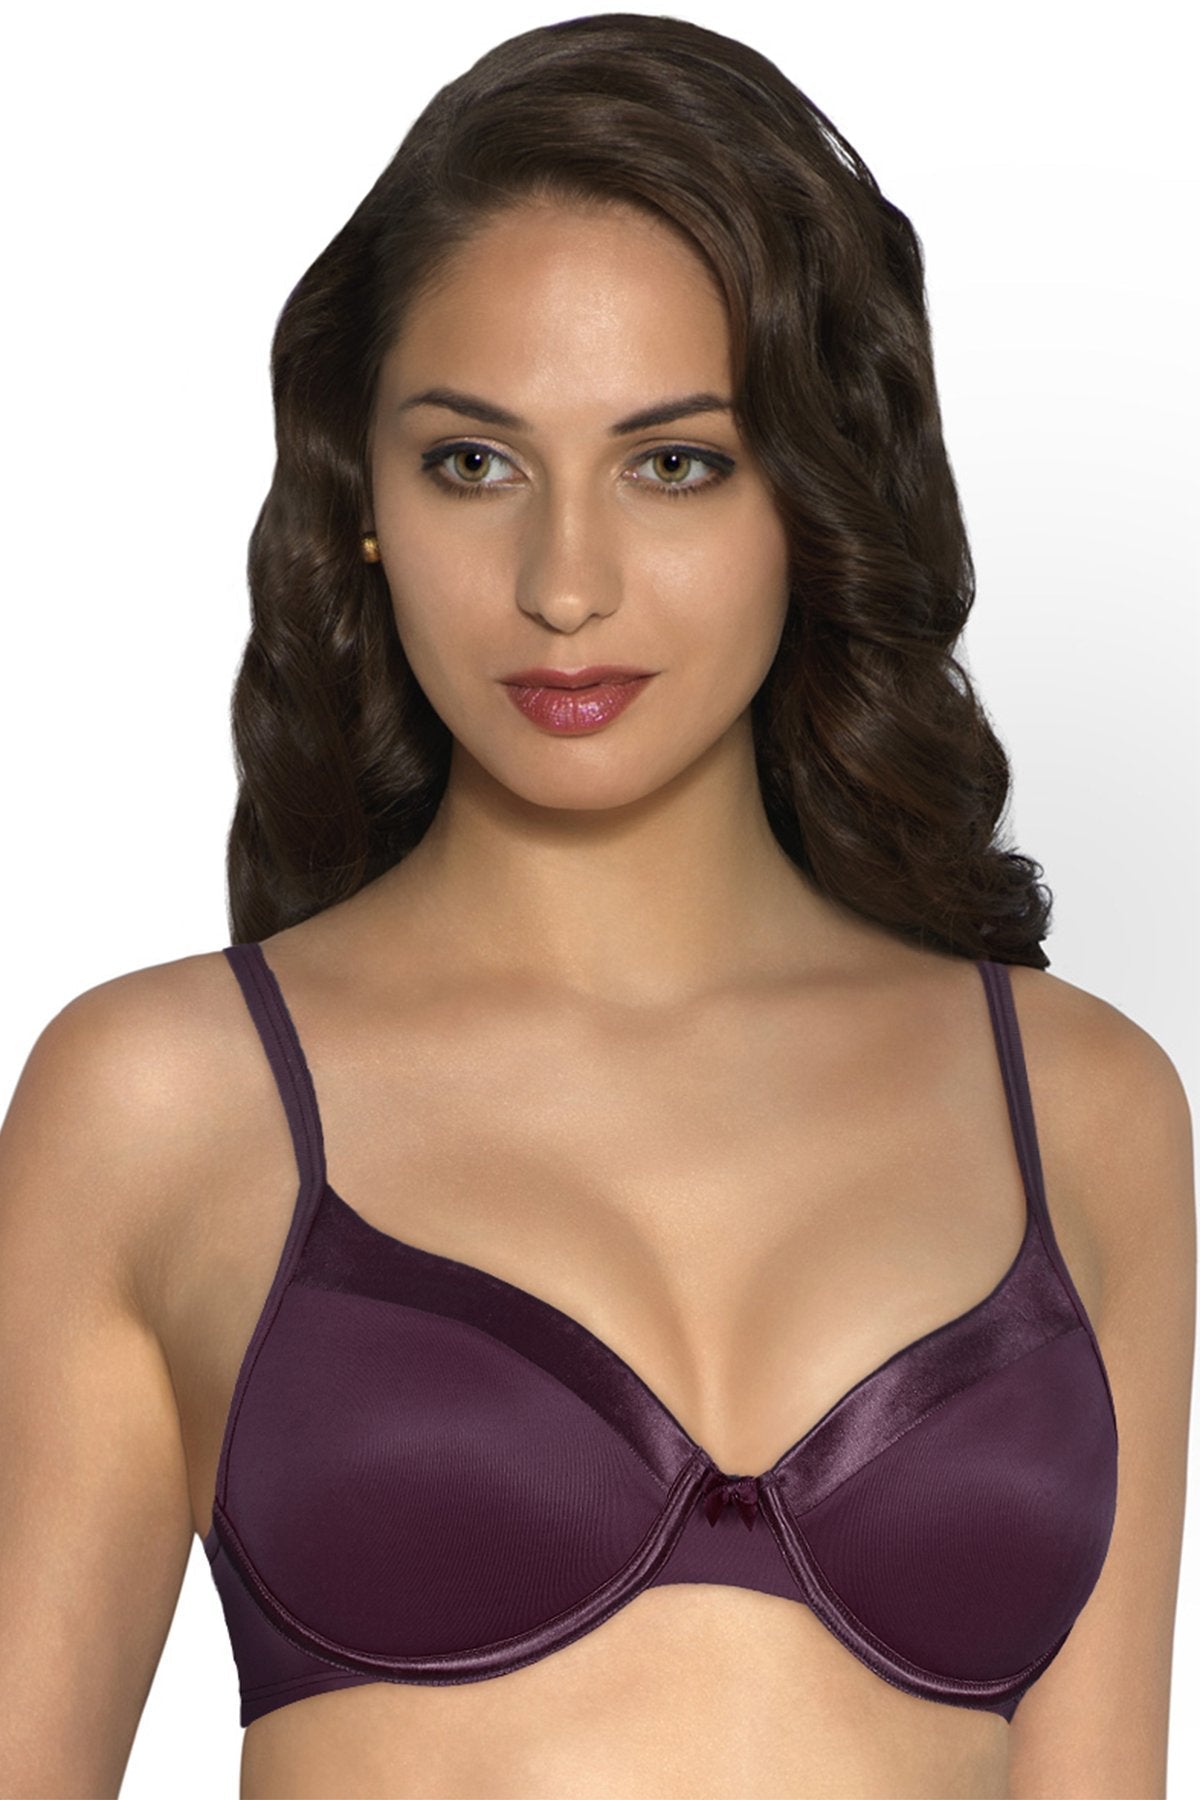 Buy Starry Trail Padded Wired Shimmer Bra, Cerise Color Bra